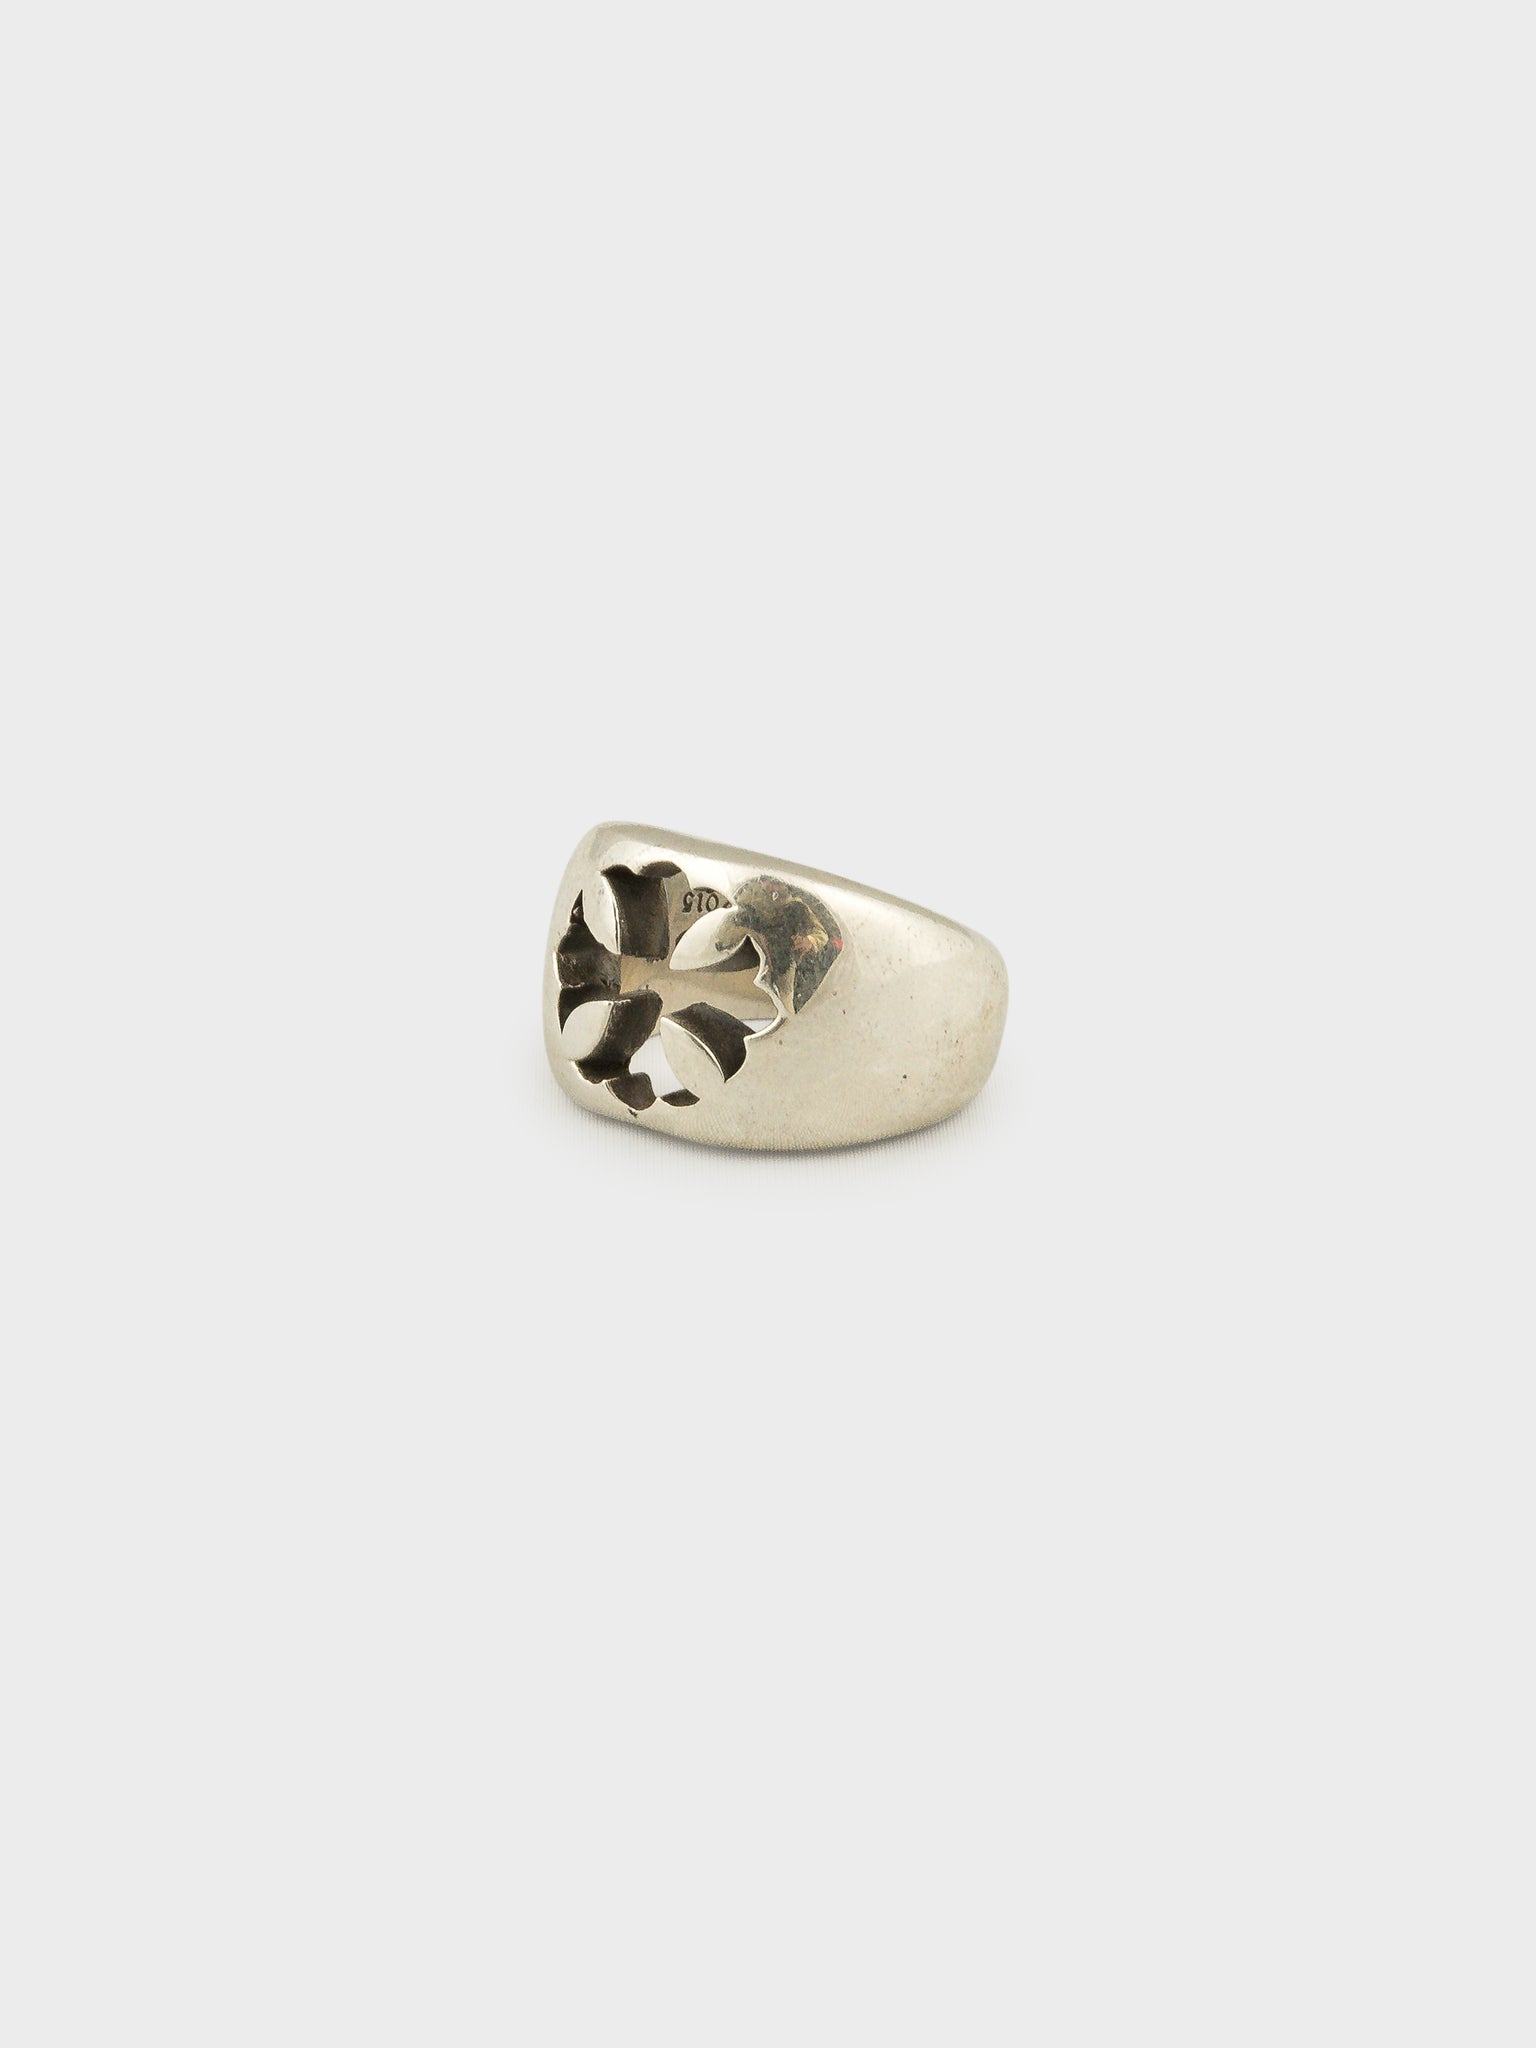 6mm Chrome Hearts Forever Ring - Spacer - Shop Now